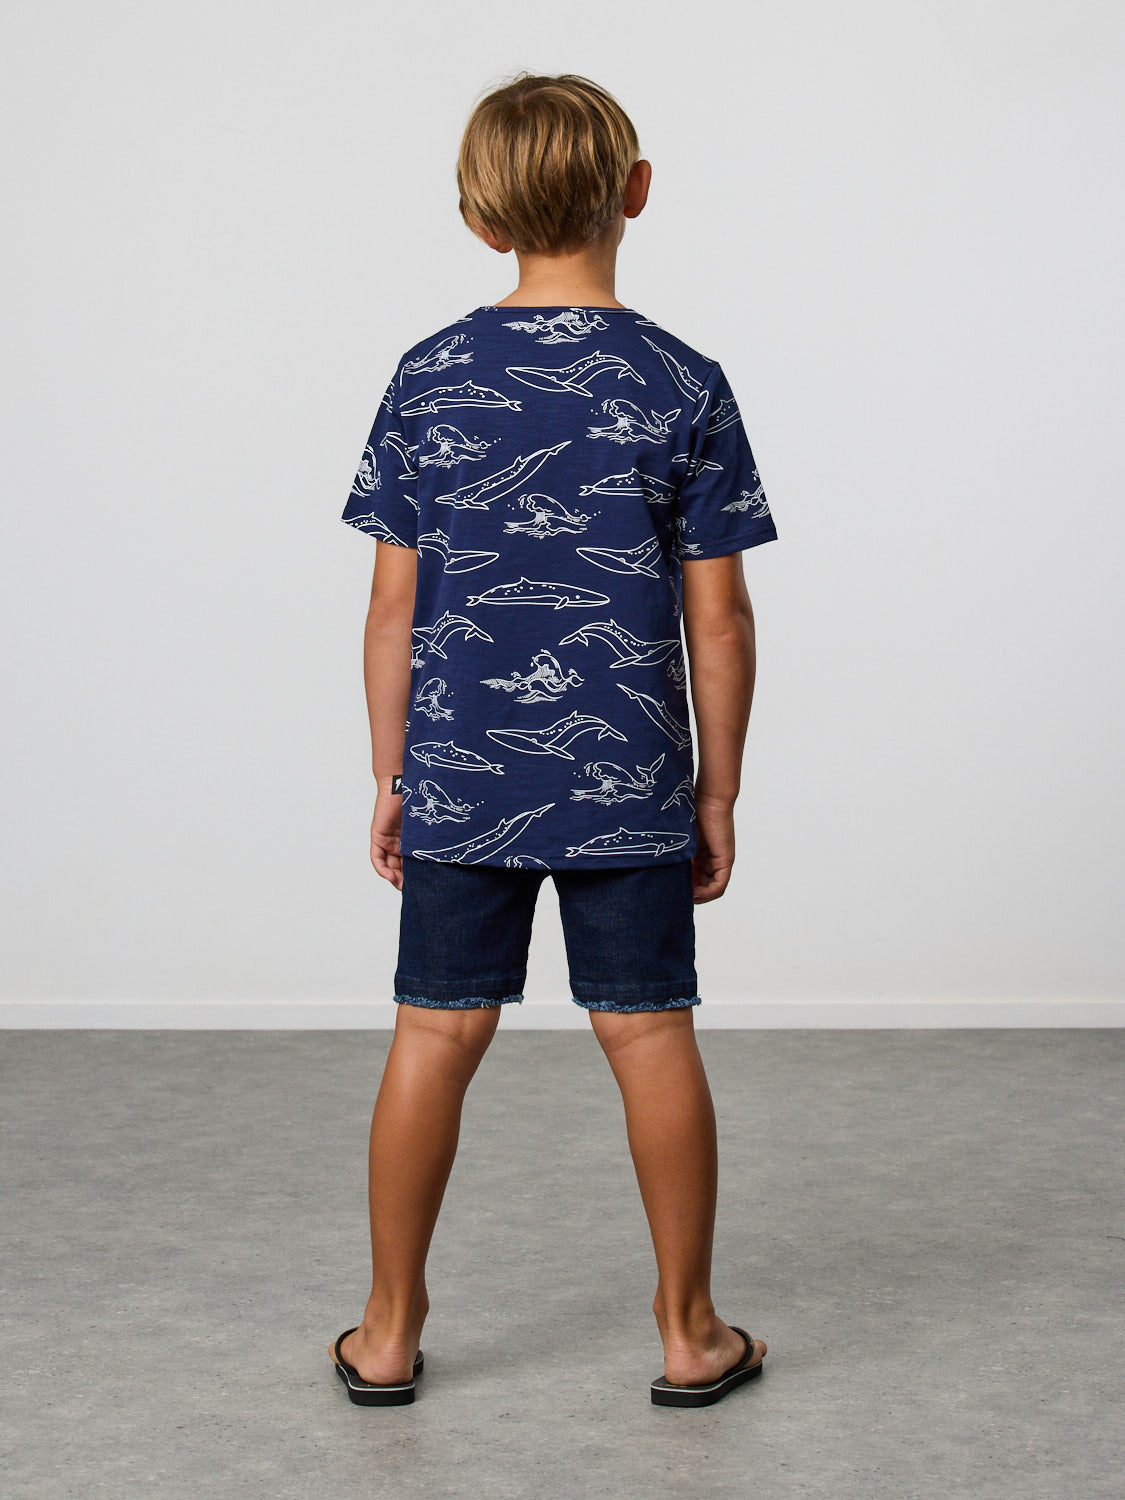 Radicool Kids Brydes's tee: Cotton / spandex tee in navy with Bryde’s whale outline yardage print in white. Part of our ‘Come Together’* series. For those that like something a little more pared back.    Fit is true to size.